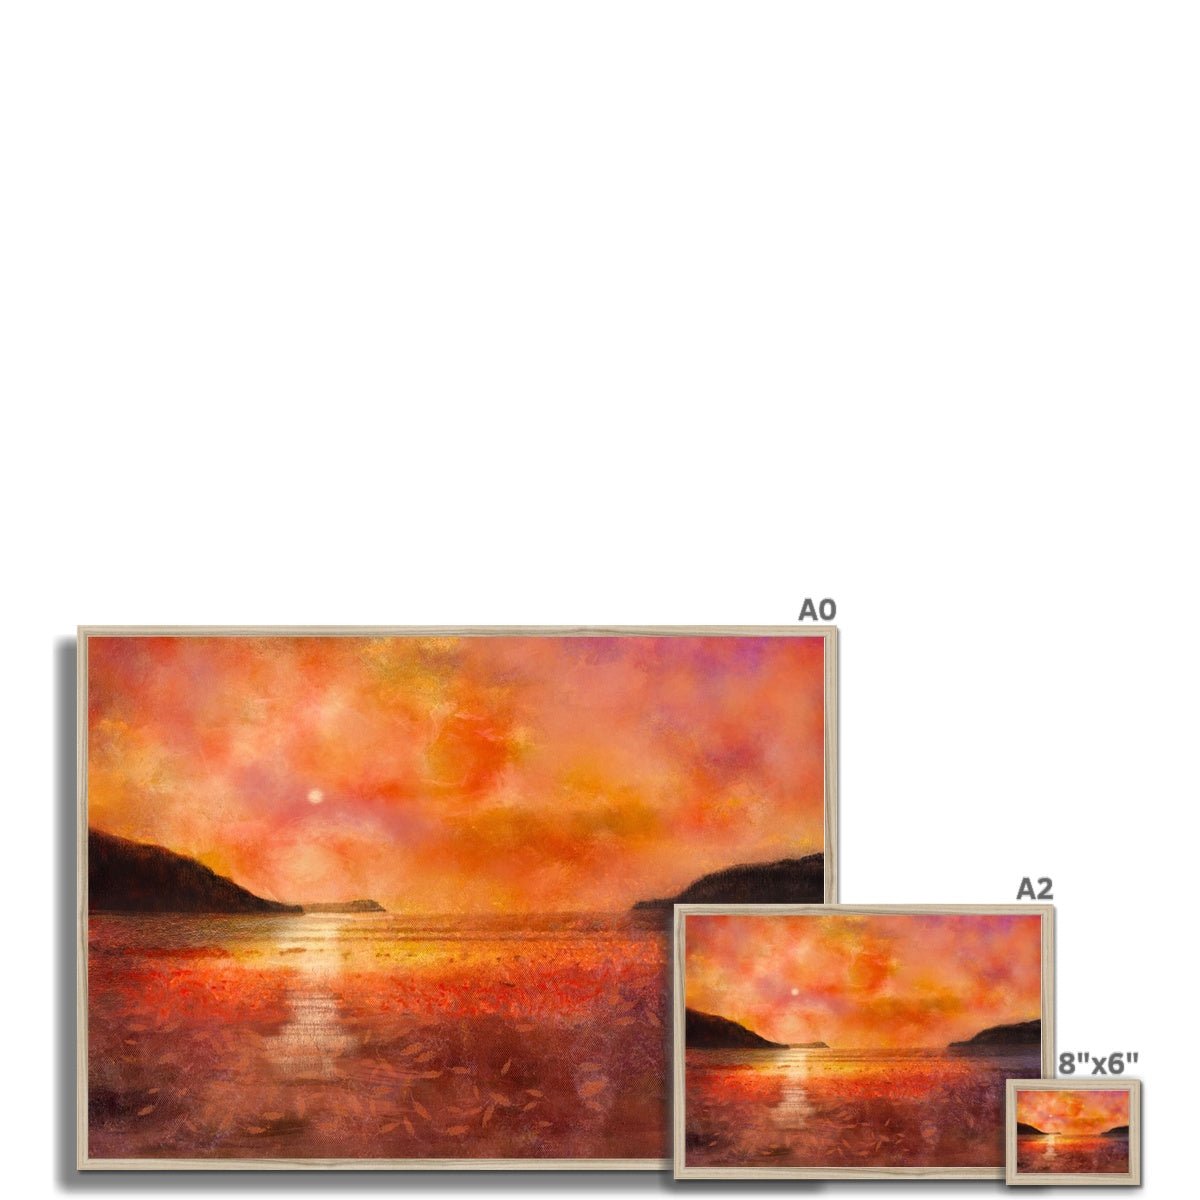 Calgary Beach Sunset Mull Painting | Framed Prints From Scotland-Framed Prints-Hebridean Islands Art Gallery-Paintings, Prints, Homeware, Art Gifts From Scotland By Scottish Artist Kevin Hunter